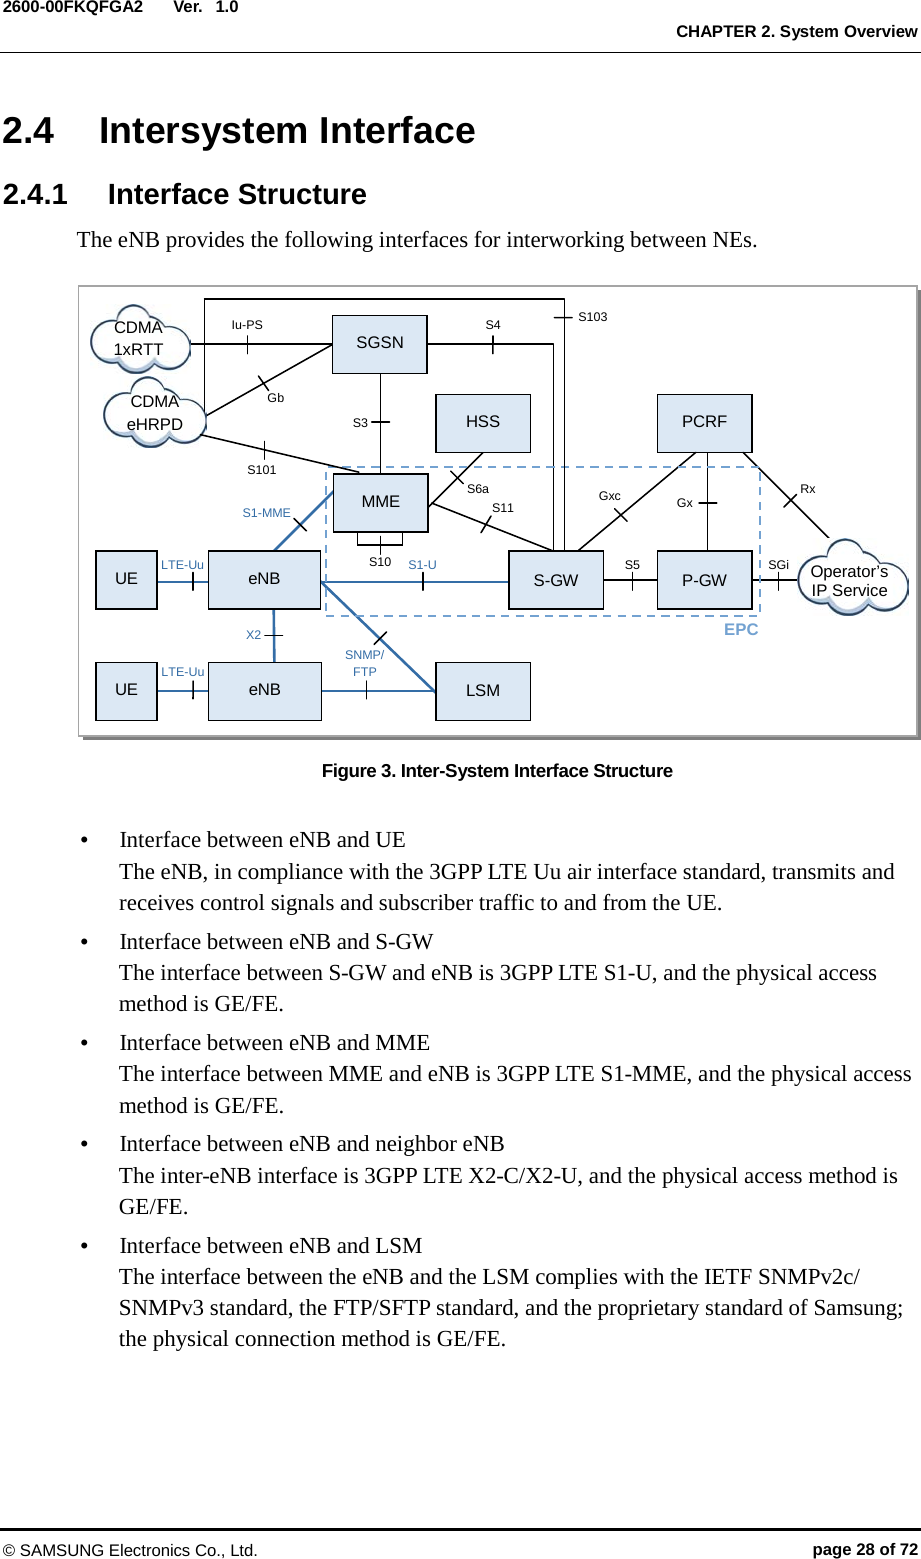  Ver.  CHAPTER 2. System Overview 2600-00FKQFGA2 1.0 2.4 Intersystem Interface   2.4.1 Interface Structure The eNB provides the following interfaces for interworking between NEs.  Figure 3. Inter-System Interface Structure     Interface between eNB and UE The eNB, in compliance with the 3GPP LTE Uu air interface standard, transmits and receives control signals and subscriber traffic to and from the UE.  Interface between eNB and S-GW The interface between S-GW and eNB is 3GPP LTE S1-U, and the physical access method is GE/FE.  Interface between eNB and MME The interface between MME and eNB is 3GPP LTE S1-MME, and the physical access method is GE/FE.    Interface between eNB and neighbor eNB The inter-eNB interface is 3GPP LTE X2-C/X2-U, and the physical access method is GE/FE.  Interface between eNB and LSM The interface between the eNB and the LSM complies with the IETF SNMPv2c/ SNMPv3 standard, the FTP/SFTP standard, and the proprietary standard of Samsung; the physical connection method is GE/FE.  SGSN HSS eNB eNB  LSM S-GW  P-GW PCRF CDMA 1xRTT CDMA eHRPD UE UE MME Iu-PS S4 LTE-Uu S1-U  S5 SGi S10 SNMP/ FTP LTE-Uu S3 S1-MME S11 S6a Gxc Rx Gx Gb X2 Operator’s IP Service EPC S101 S103 © SAMSUNG Electronics Co., Ltd. page 28 of 72 